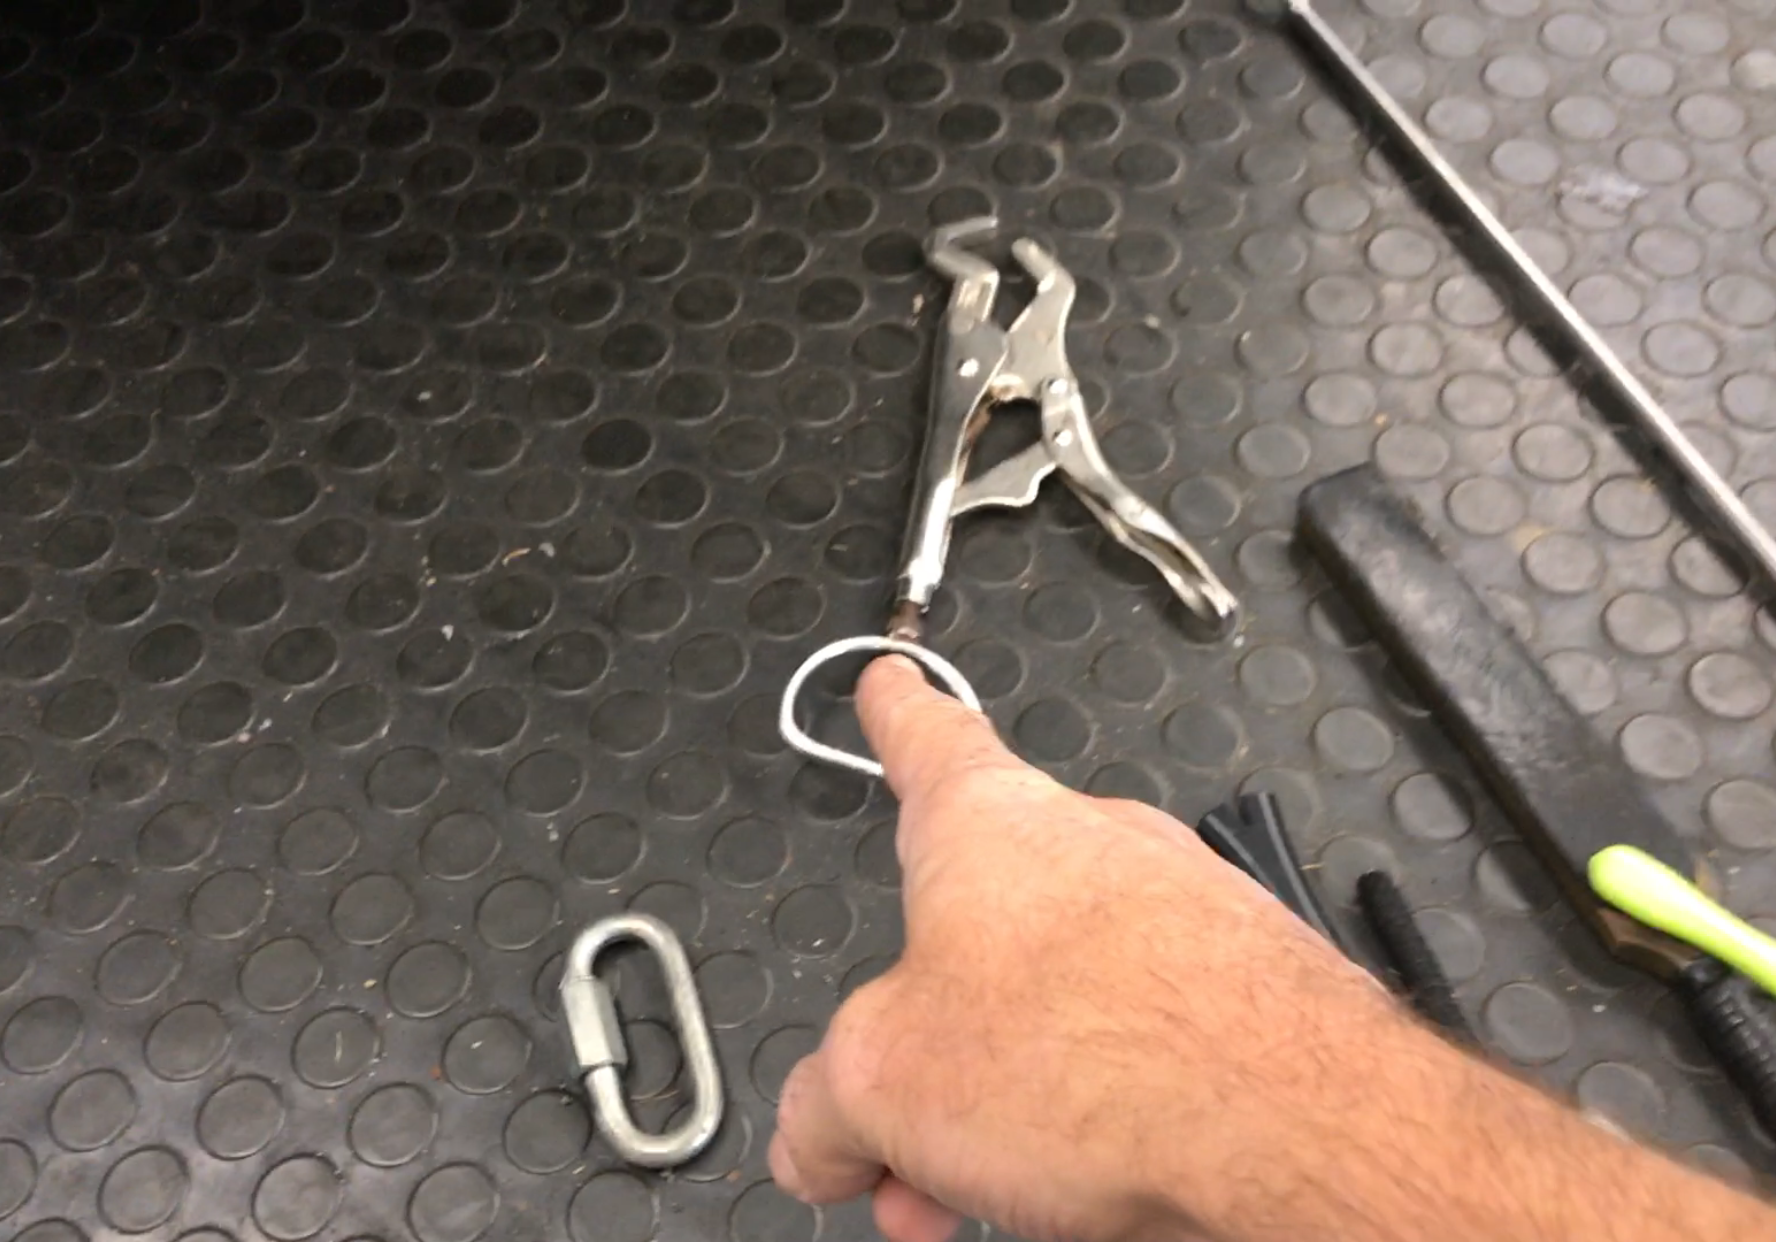 Door Jam Tool. Holds the deck lid secure. http://217dent.com Springfield, IL